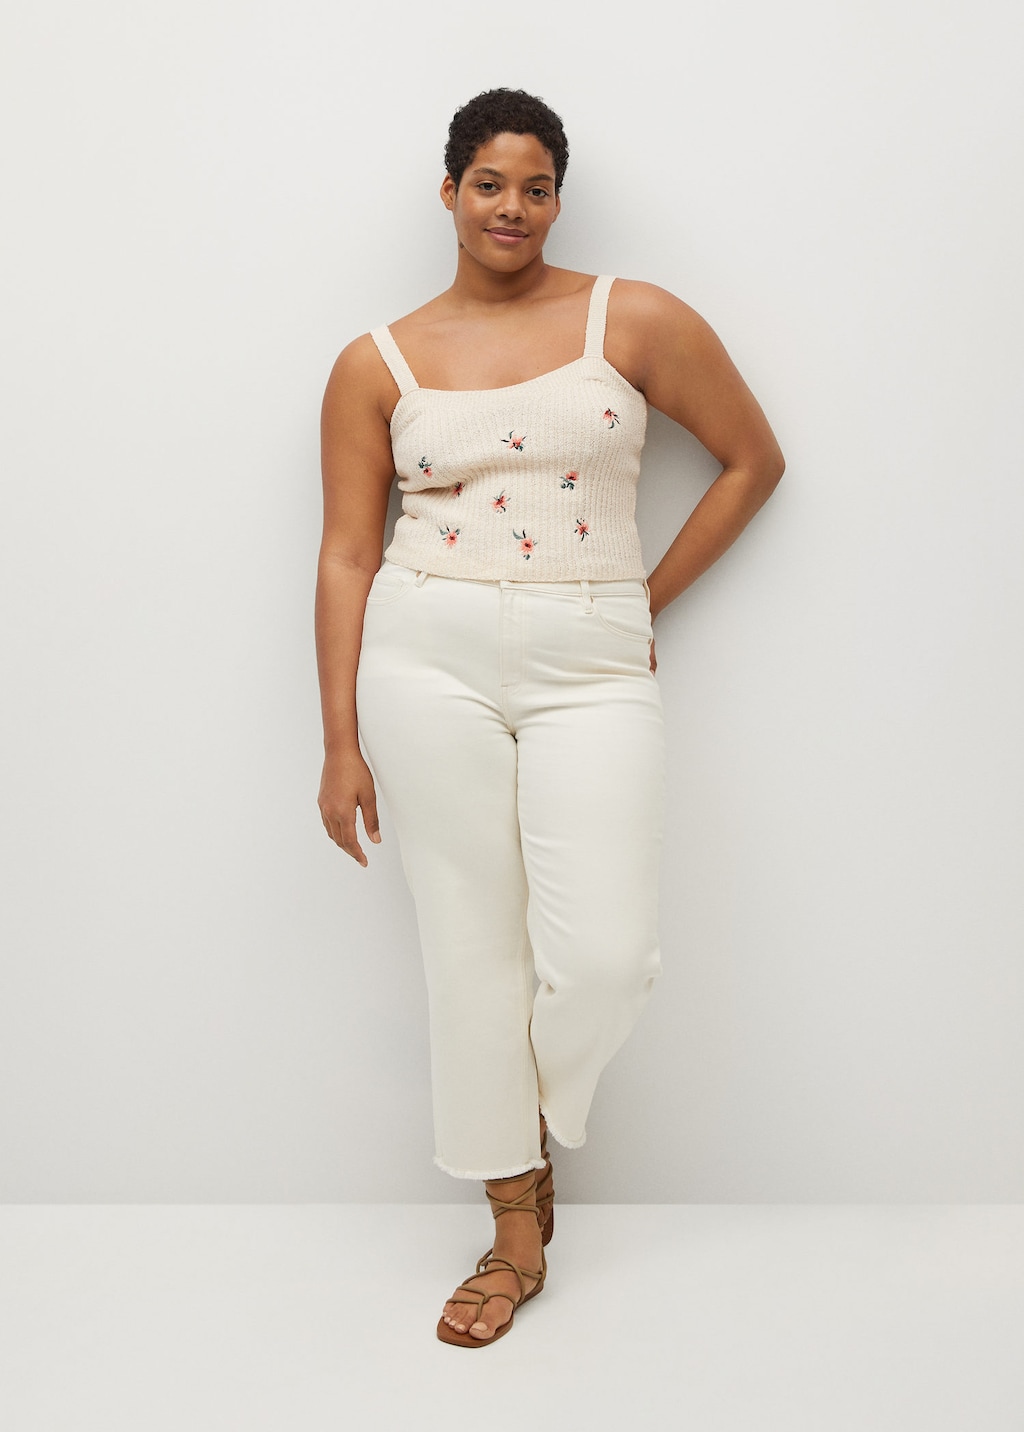 Statement-Making Plus Size Spring Trends - knit wear